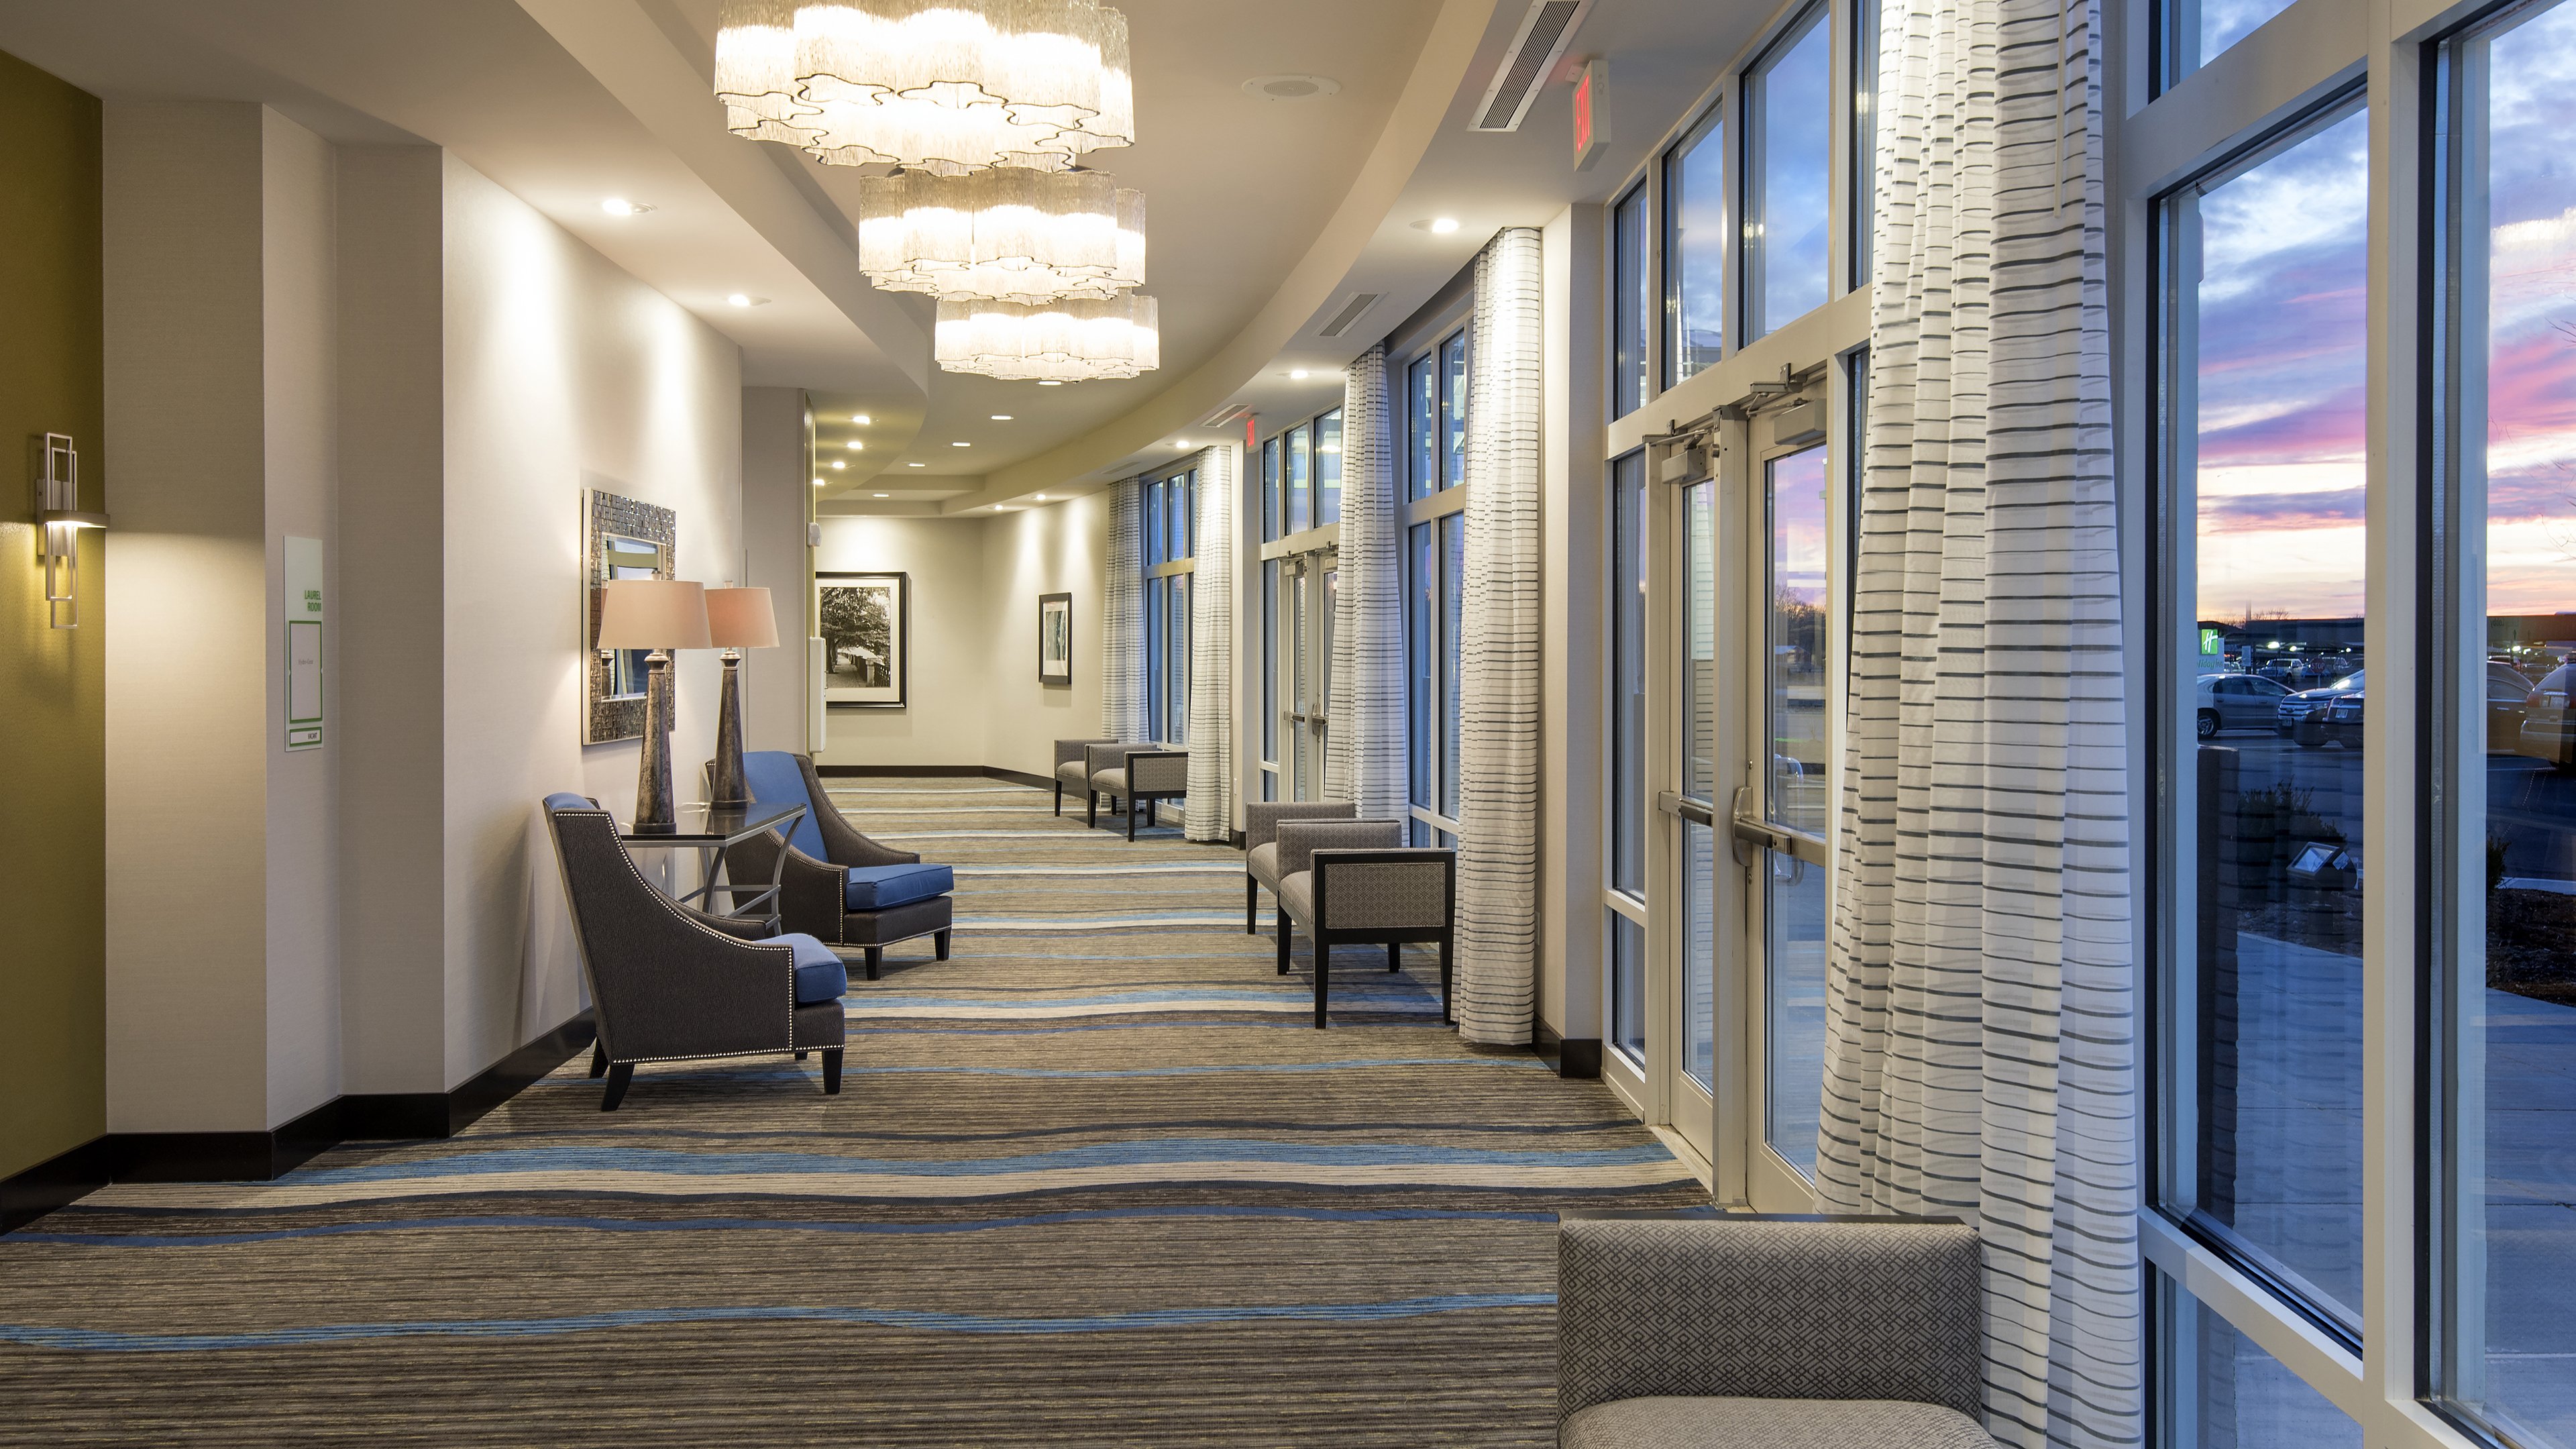 Catch up on calls or emails in our spacious pre-function area.